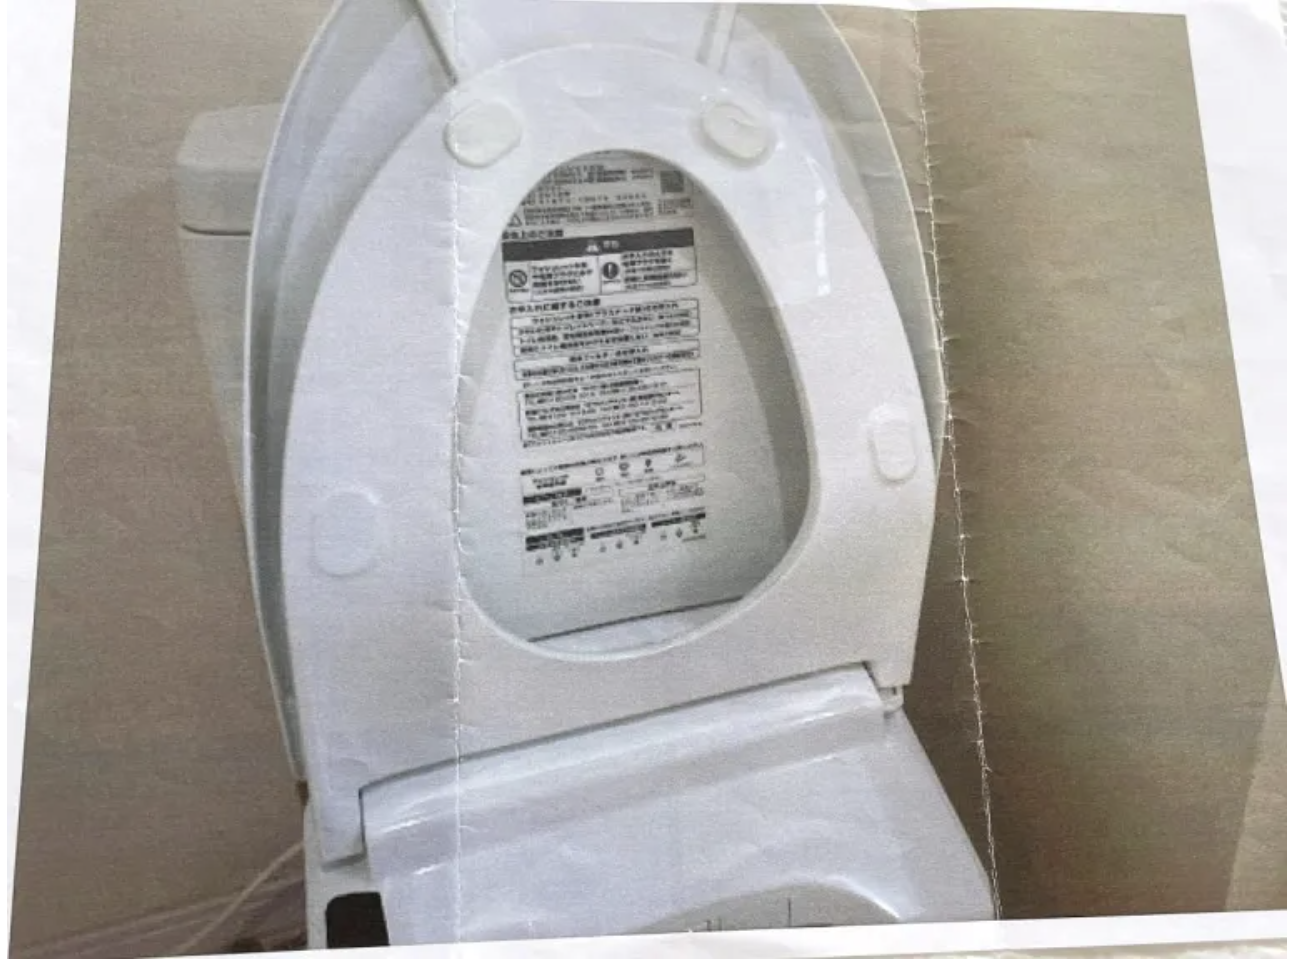 Cleaner who found $100,000 in toilet can keep $80,000